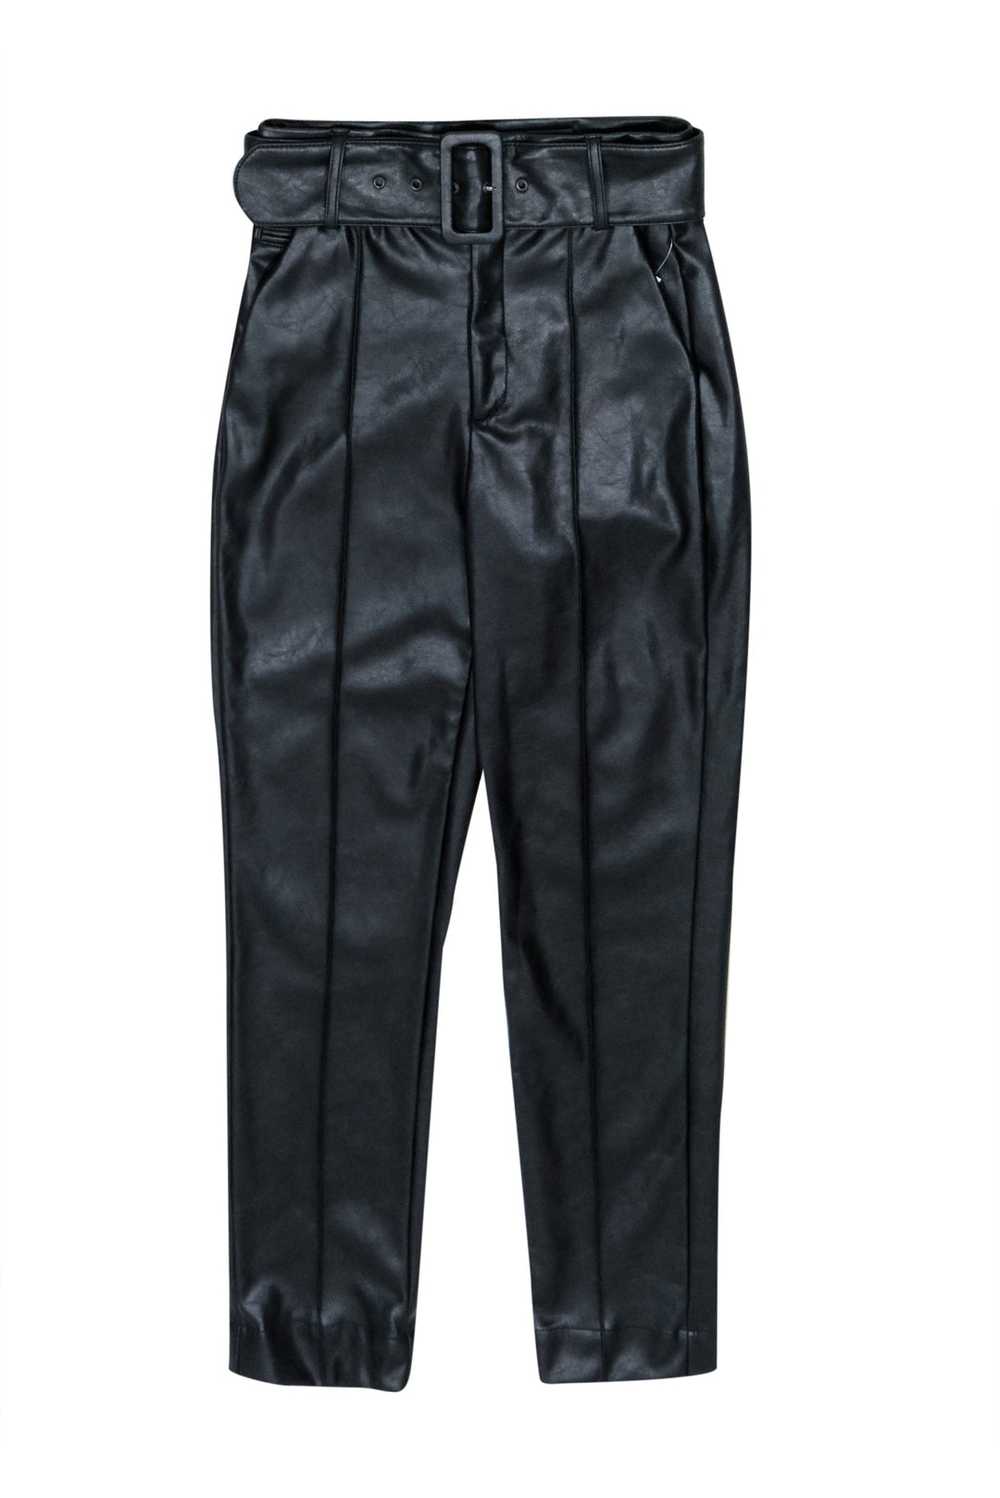 The Kooples - Black Faux Leather Belted Pants Sz S - image 1